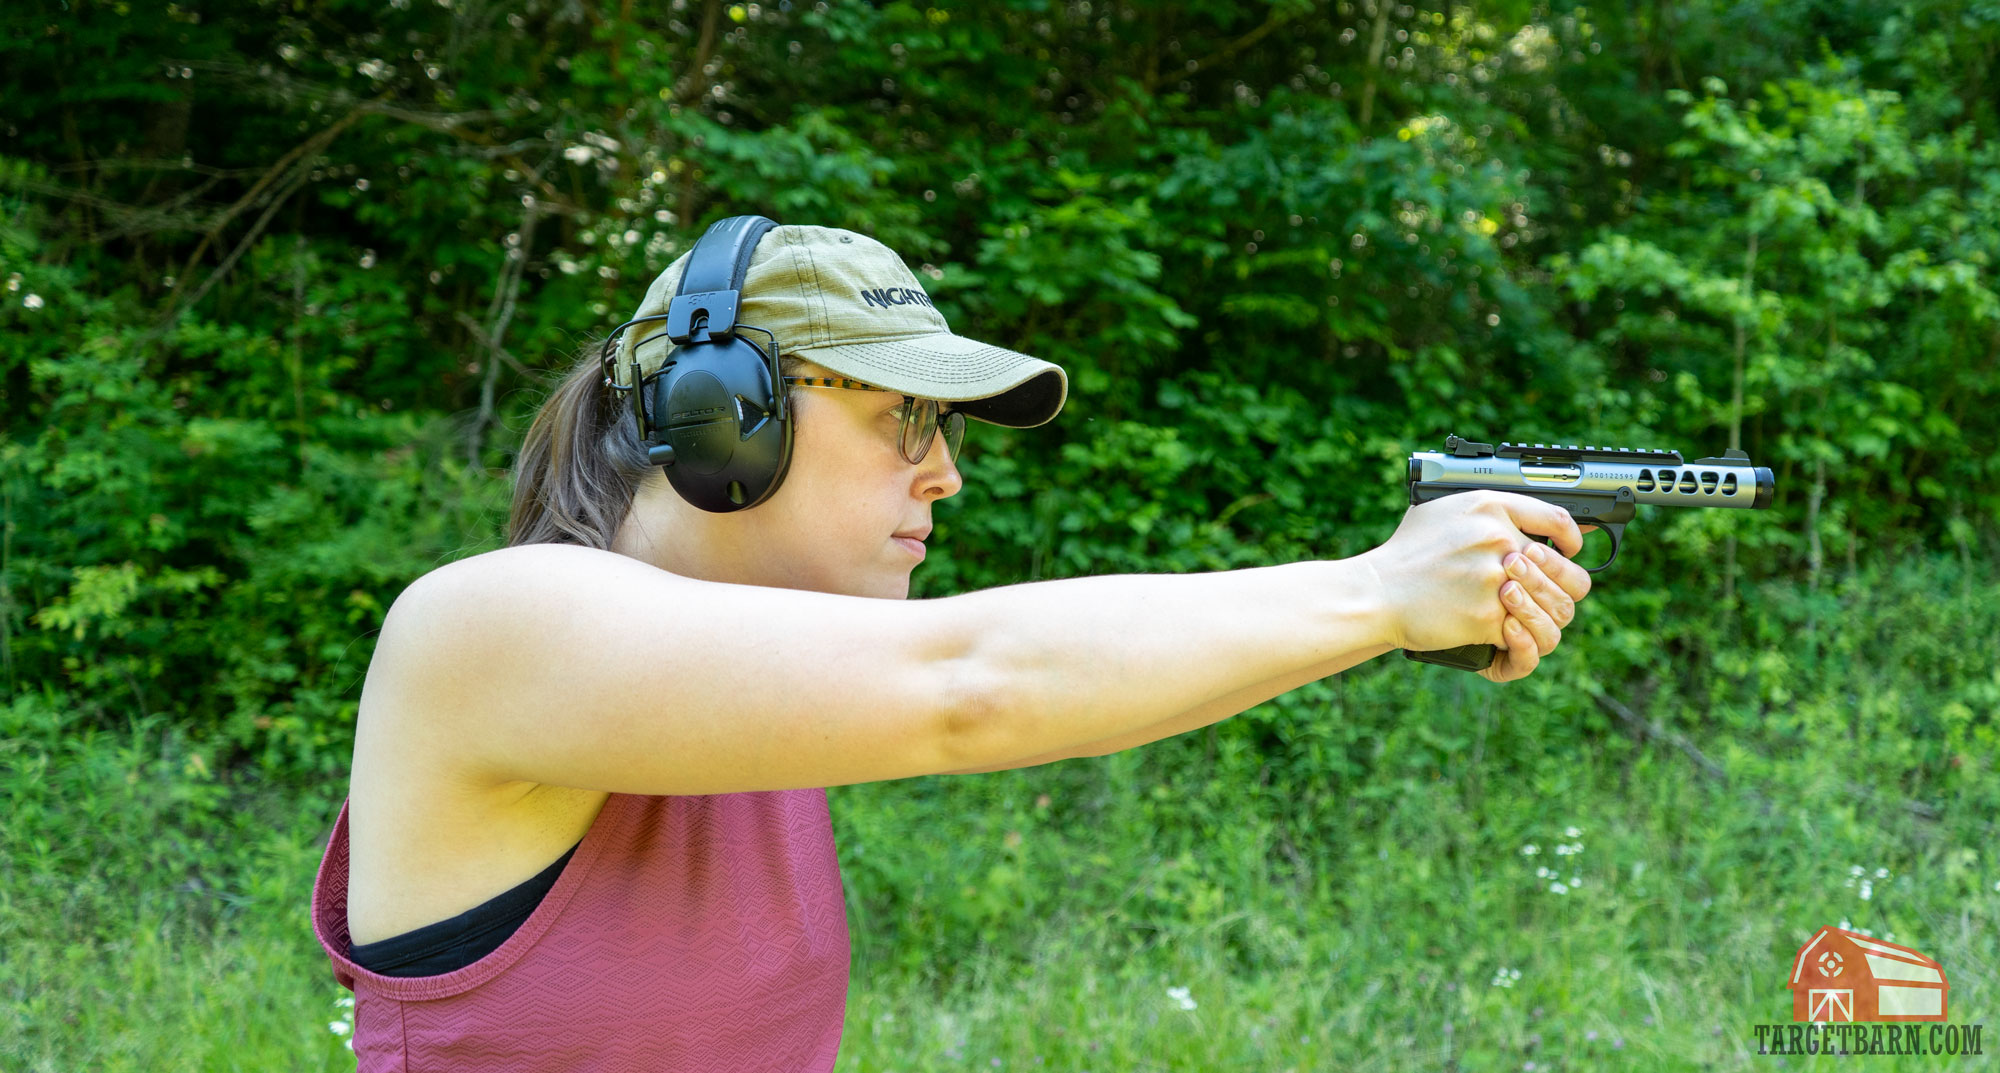 the author plinking with a ruger mark iv 22/45 lite .22lr pistol at the range